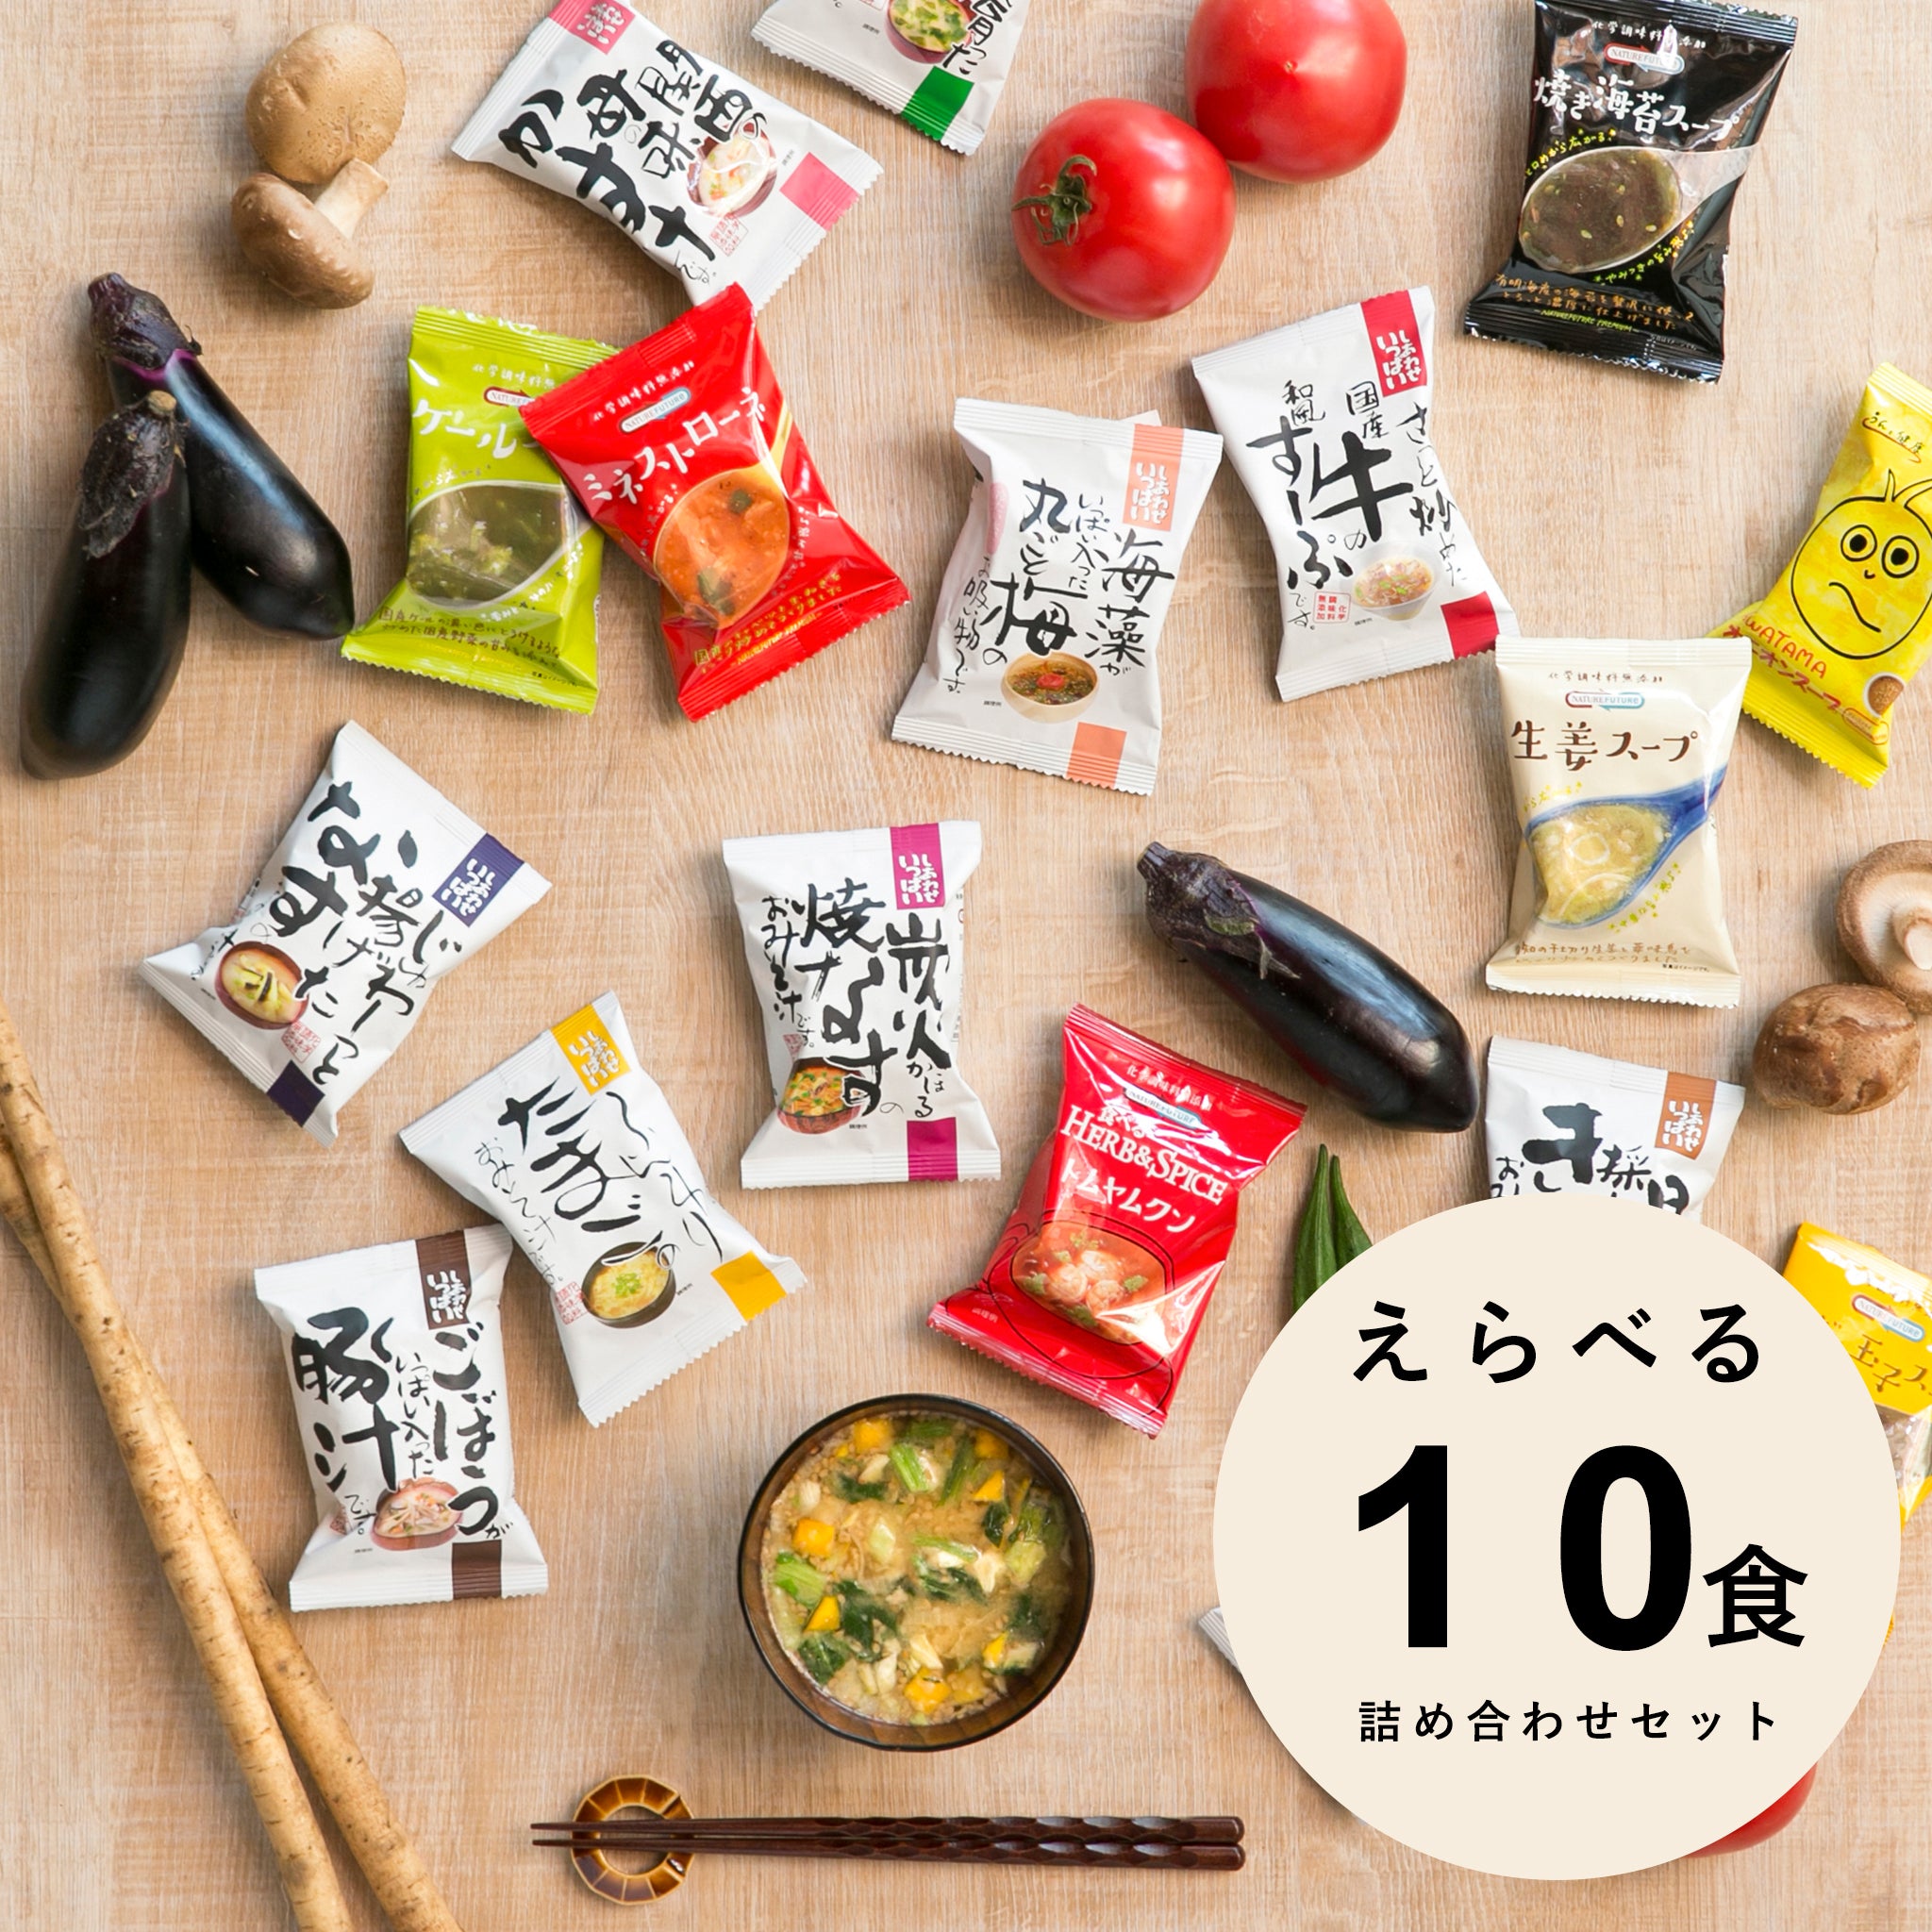 meals　soup　food　Freeze-dried　10　miso　Cosmos　Selectable　set　コスモス食品　嶋ノ屋